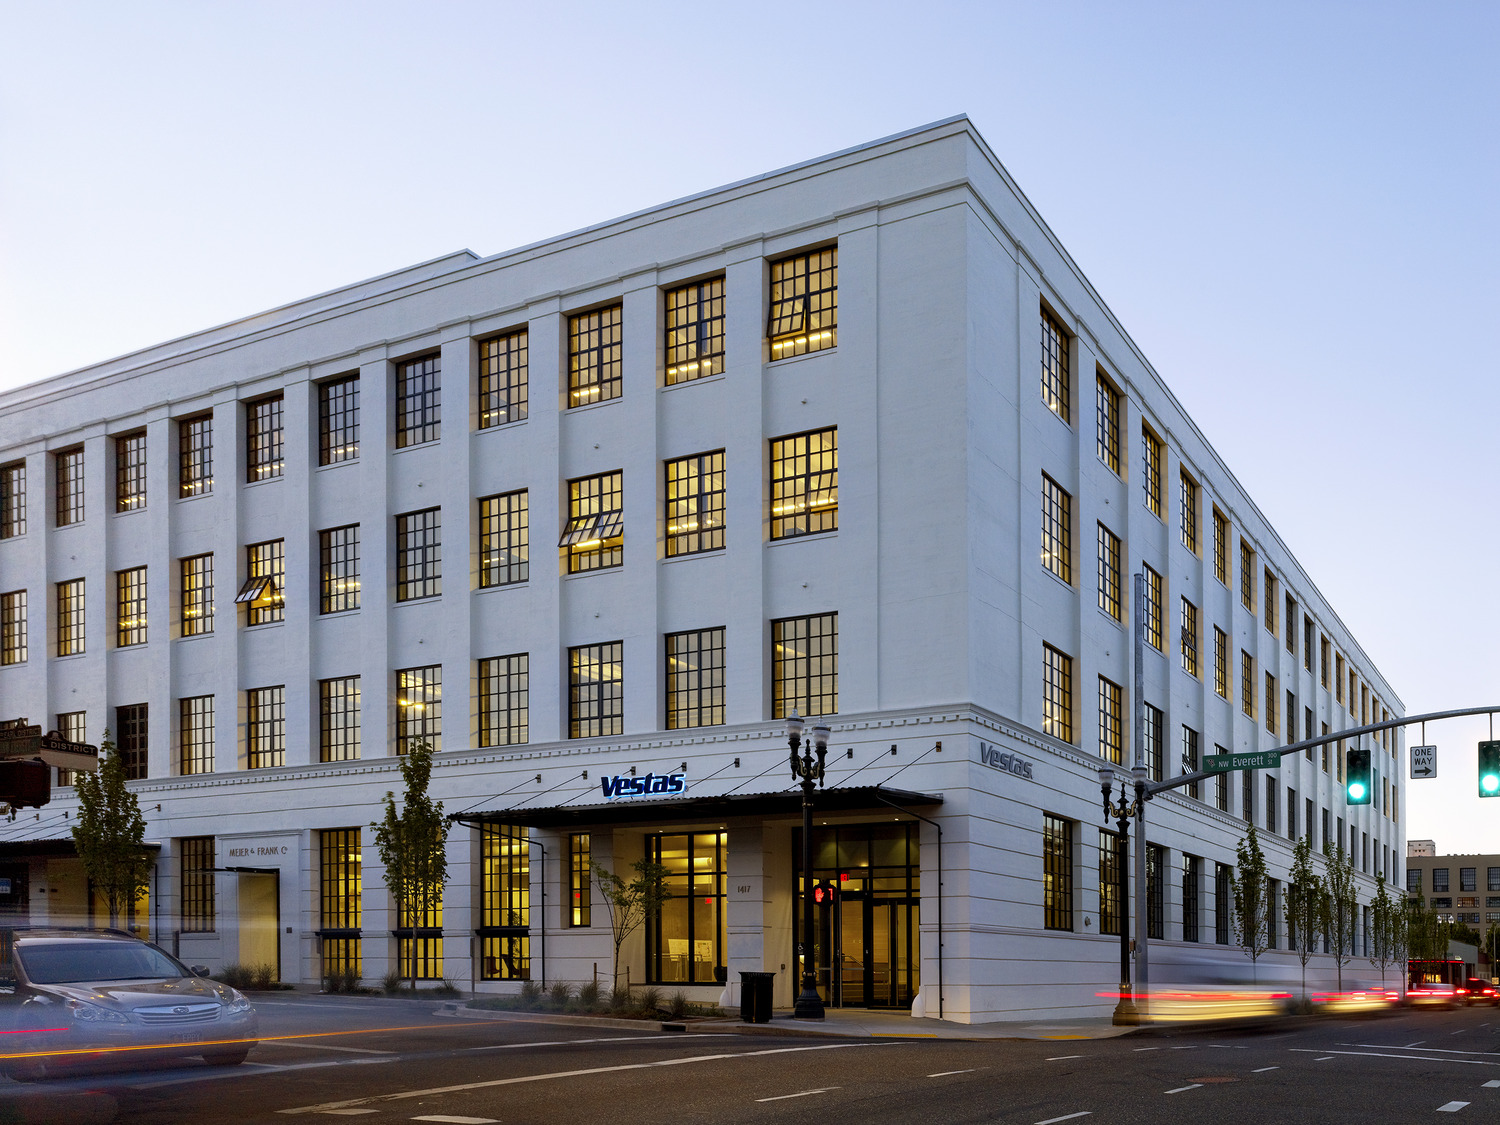 Should Your Building Become Housing? Critical Considerations for Adaptive Reuse